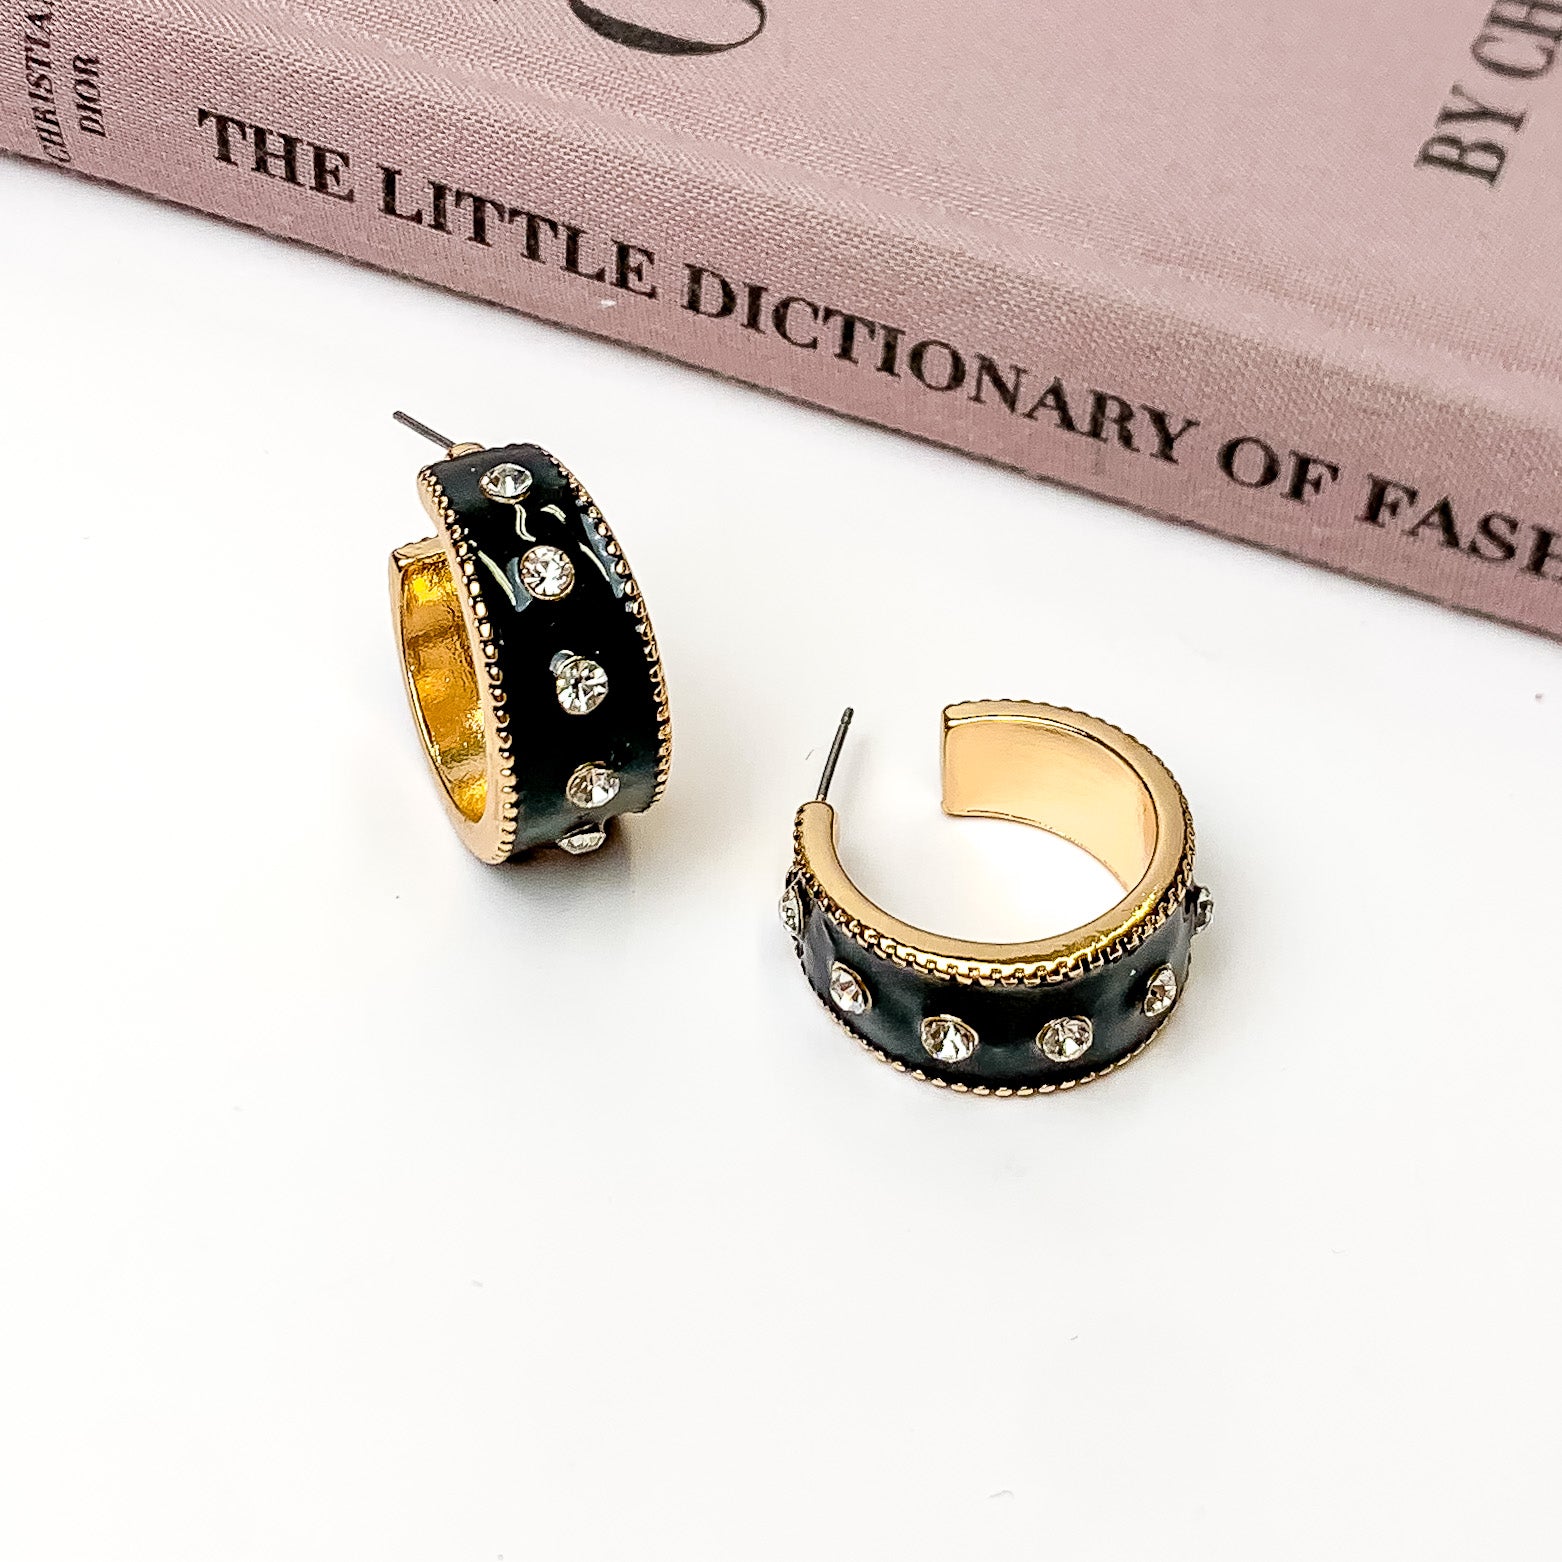 Thick, gold hoop earrings with a black inlay on the outside. These hoops also include a single line of clear crystals through the middle. One hoop is pictured stadning up right and the other is pictured laying on its side. These hoops are pictured on a white background with a mauve colored book above the earrings. 